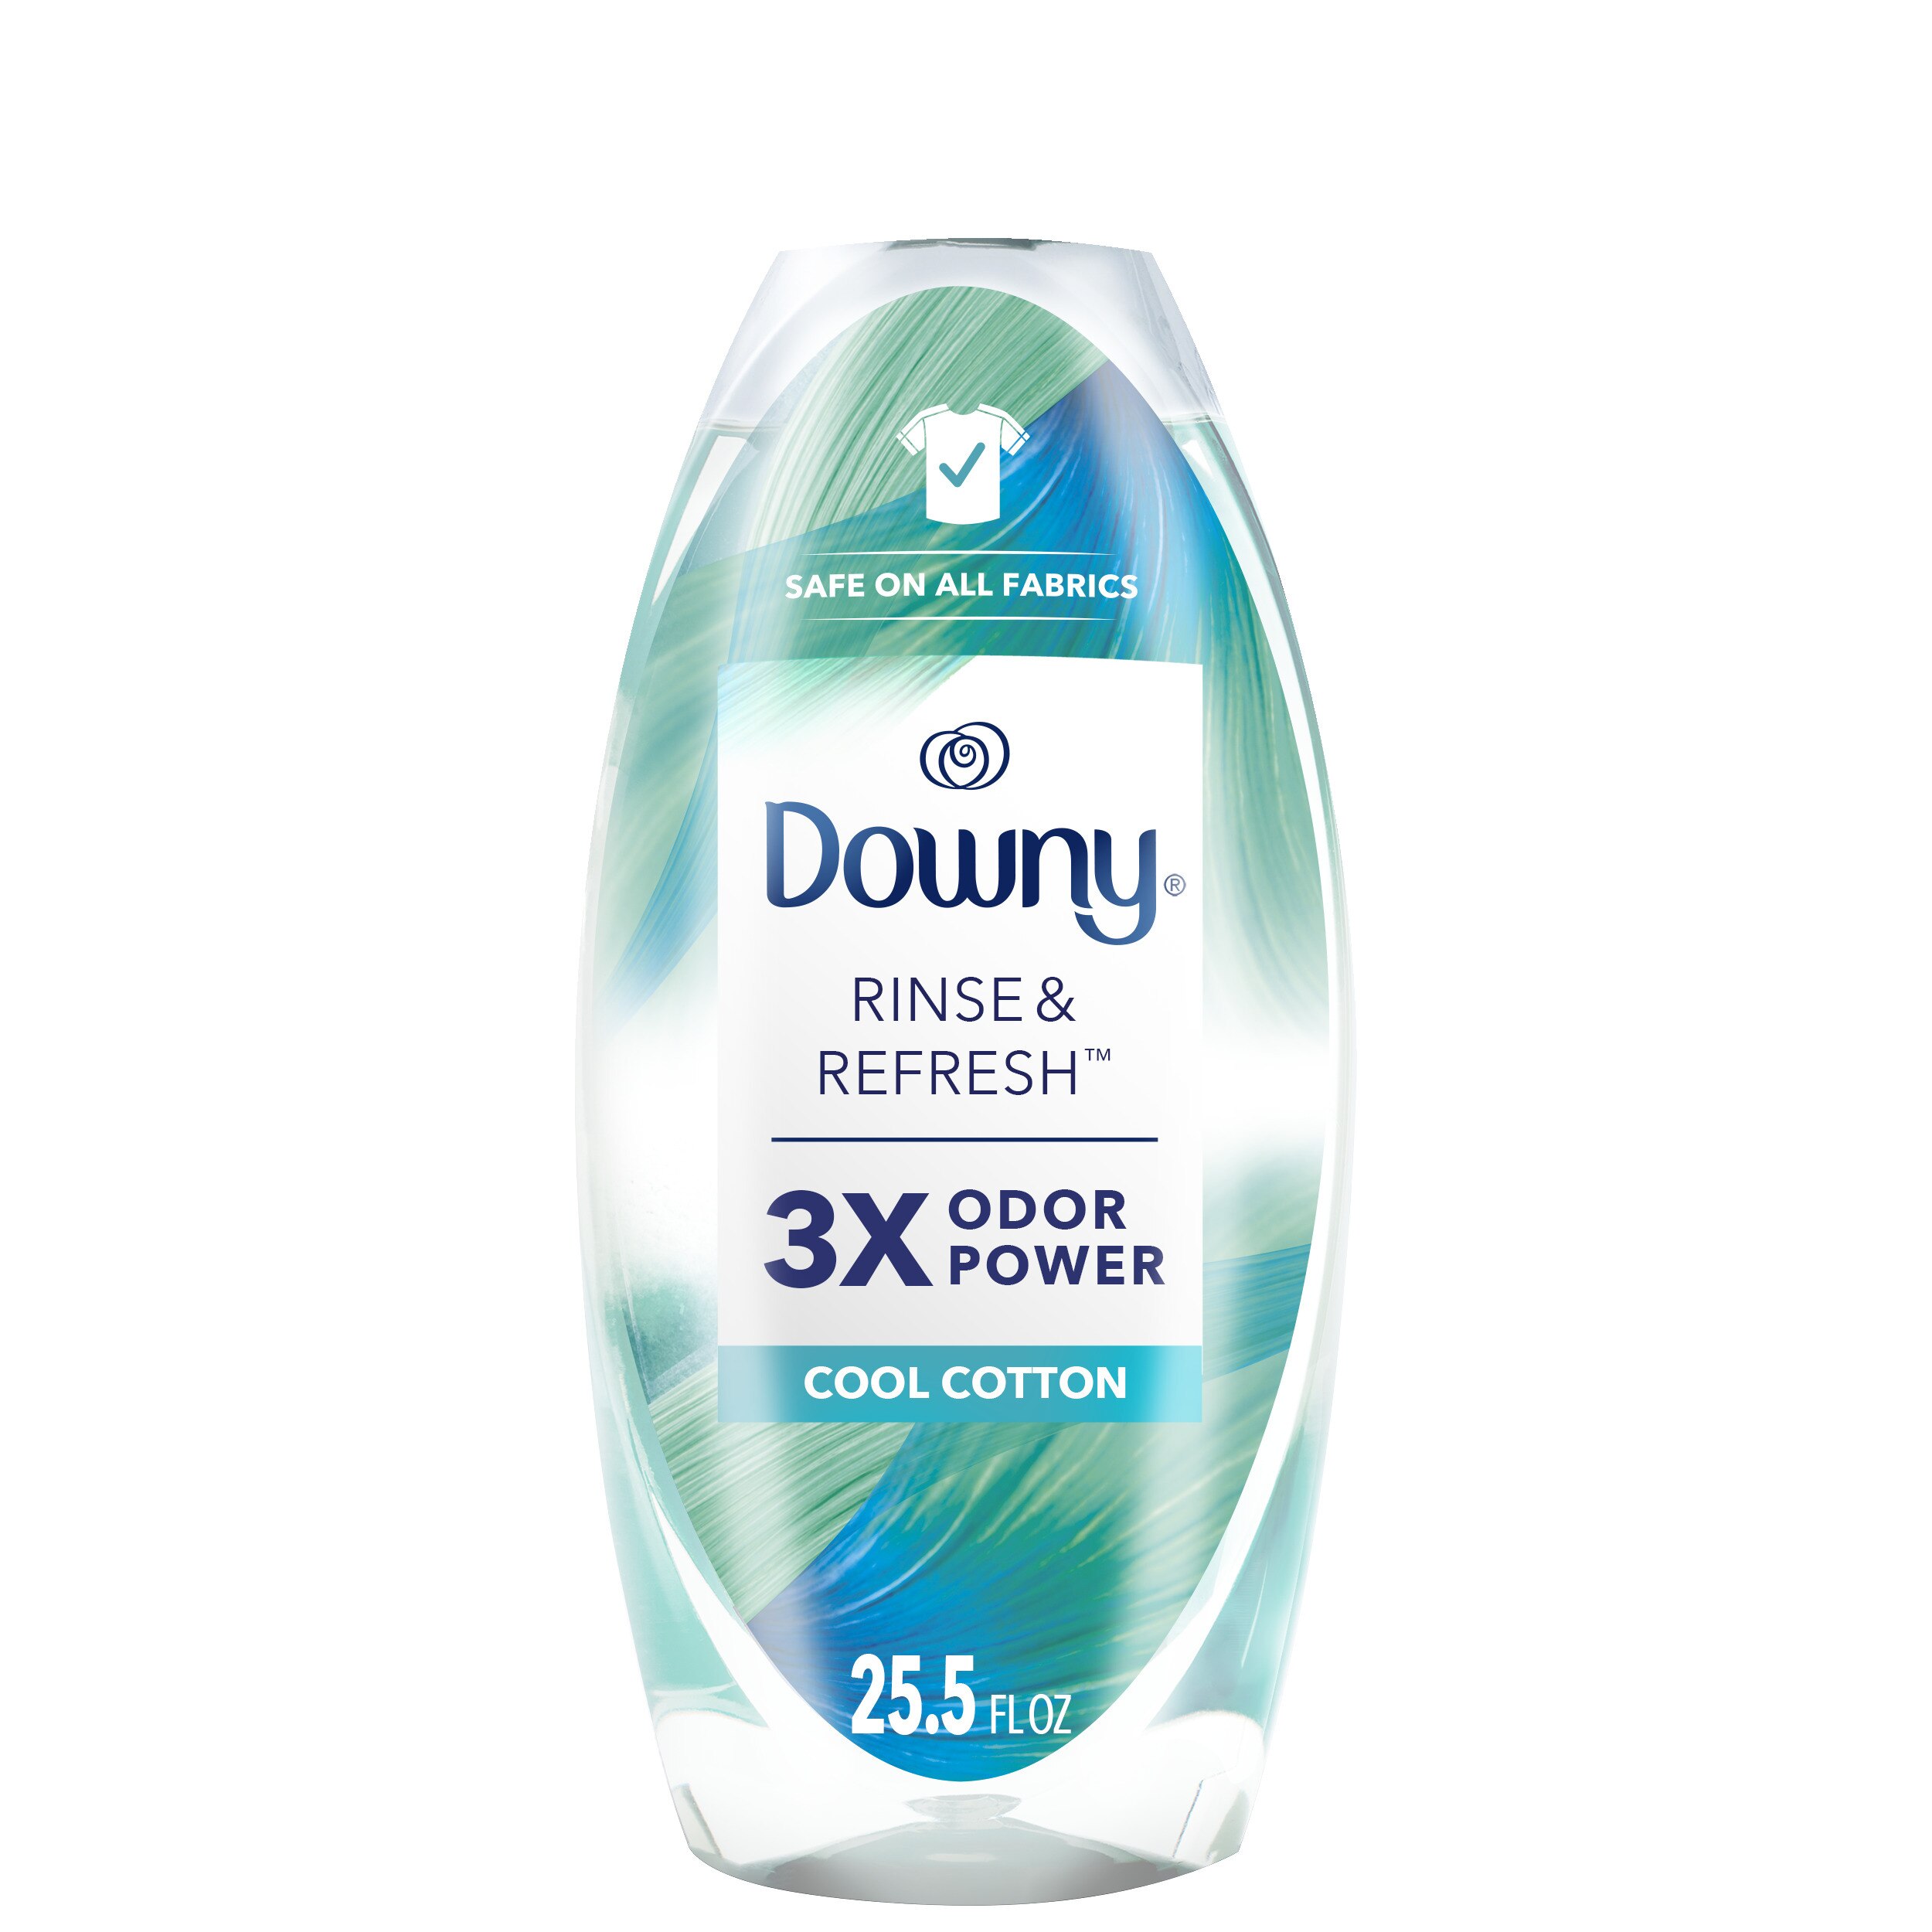 Downy RINSE & REFRESH Laundry Odor Remover And Fabric Softener, Cool Cotton, 25.5 Oz , CVS